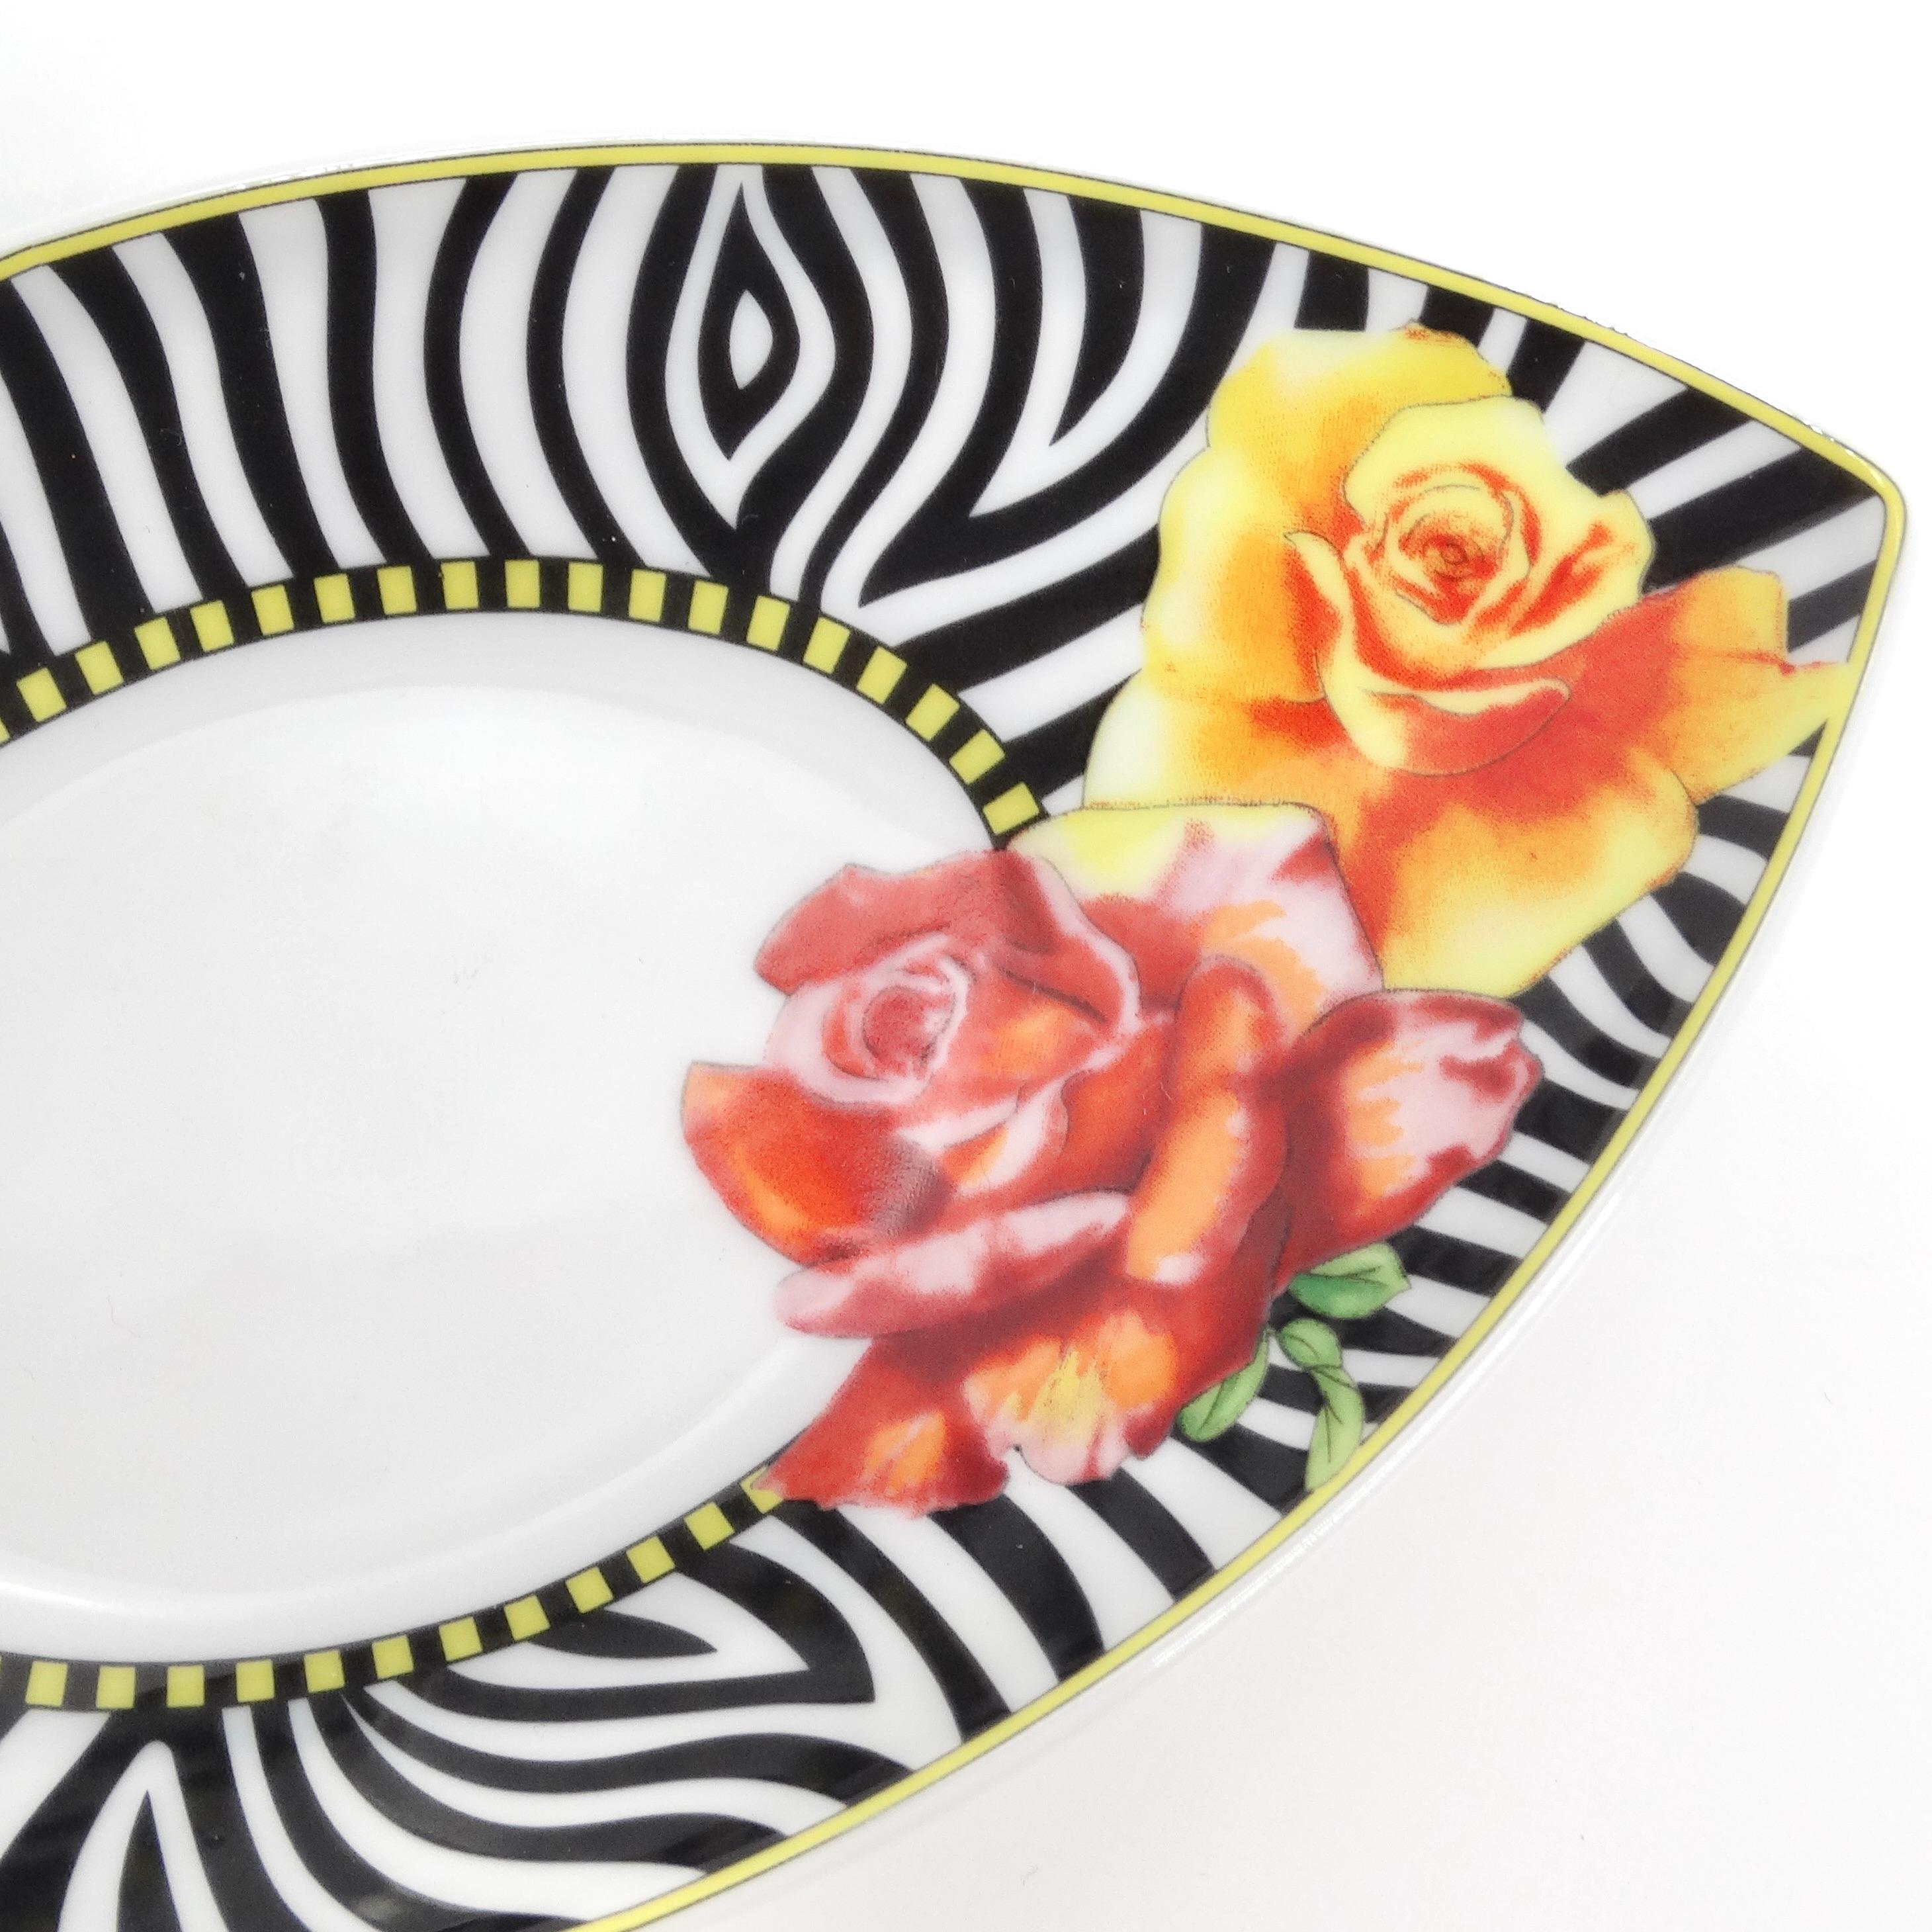 Introducing the Versace Rosenthal Hot Flowers Saucer Dish, a stunning and luxurious porcelain small oval tray designed to infuse your space with opulence and style. Crafted with meticulous attention to detail, this dish features a whimsical print